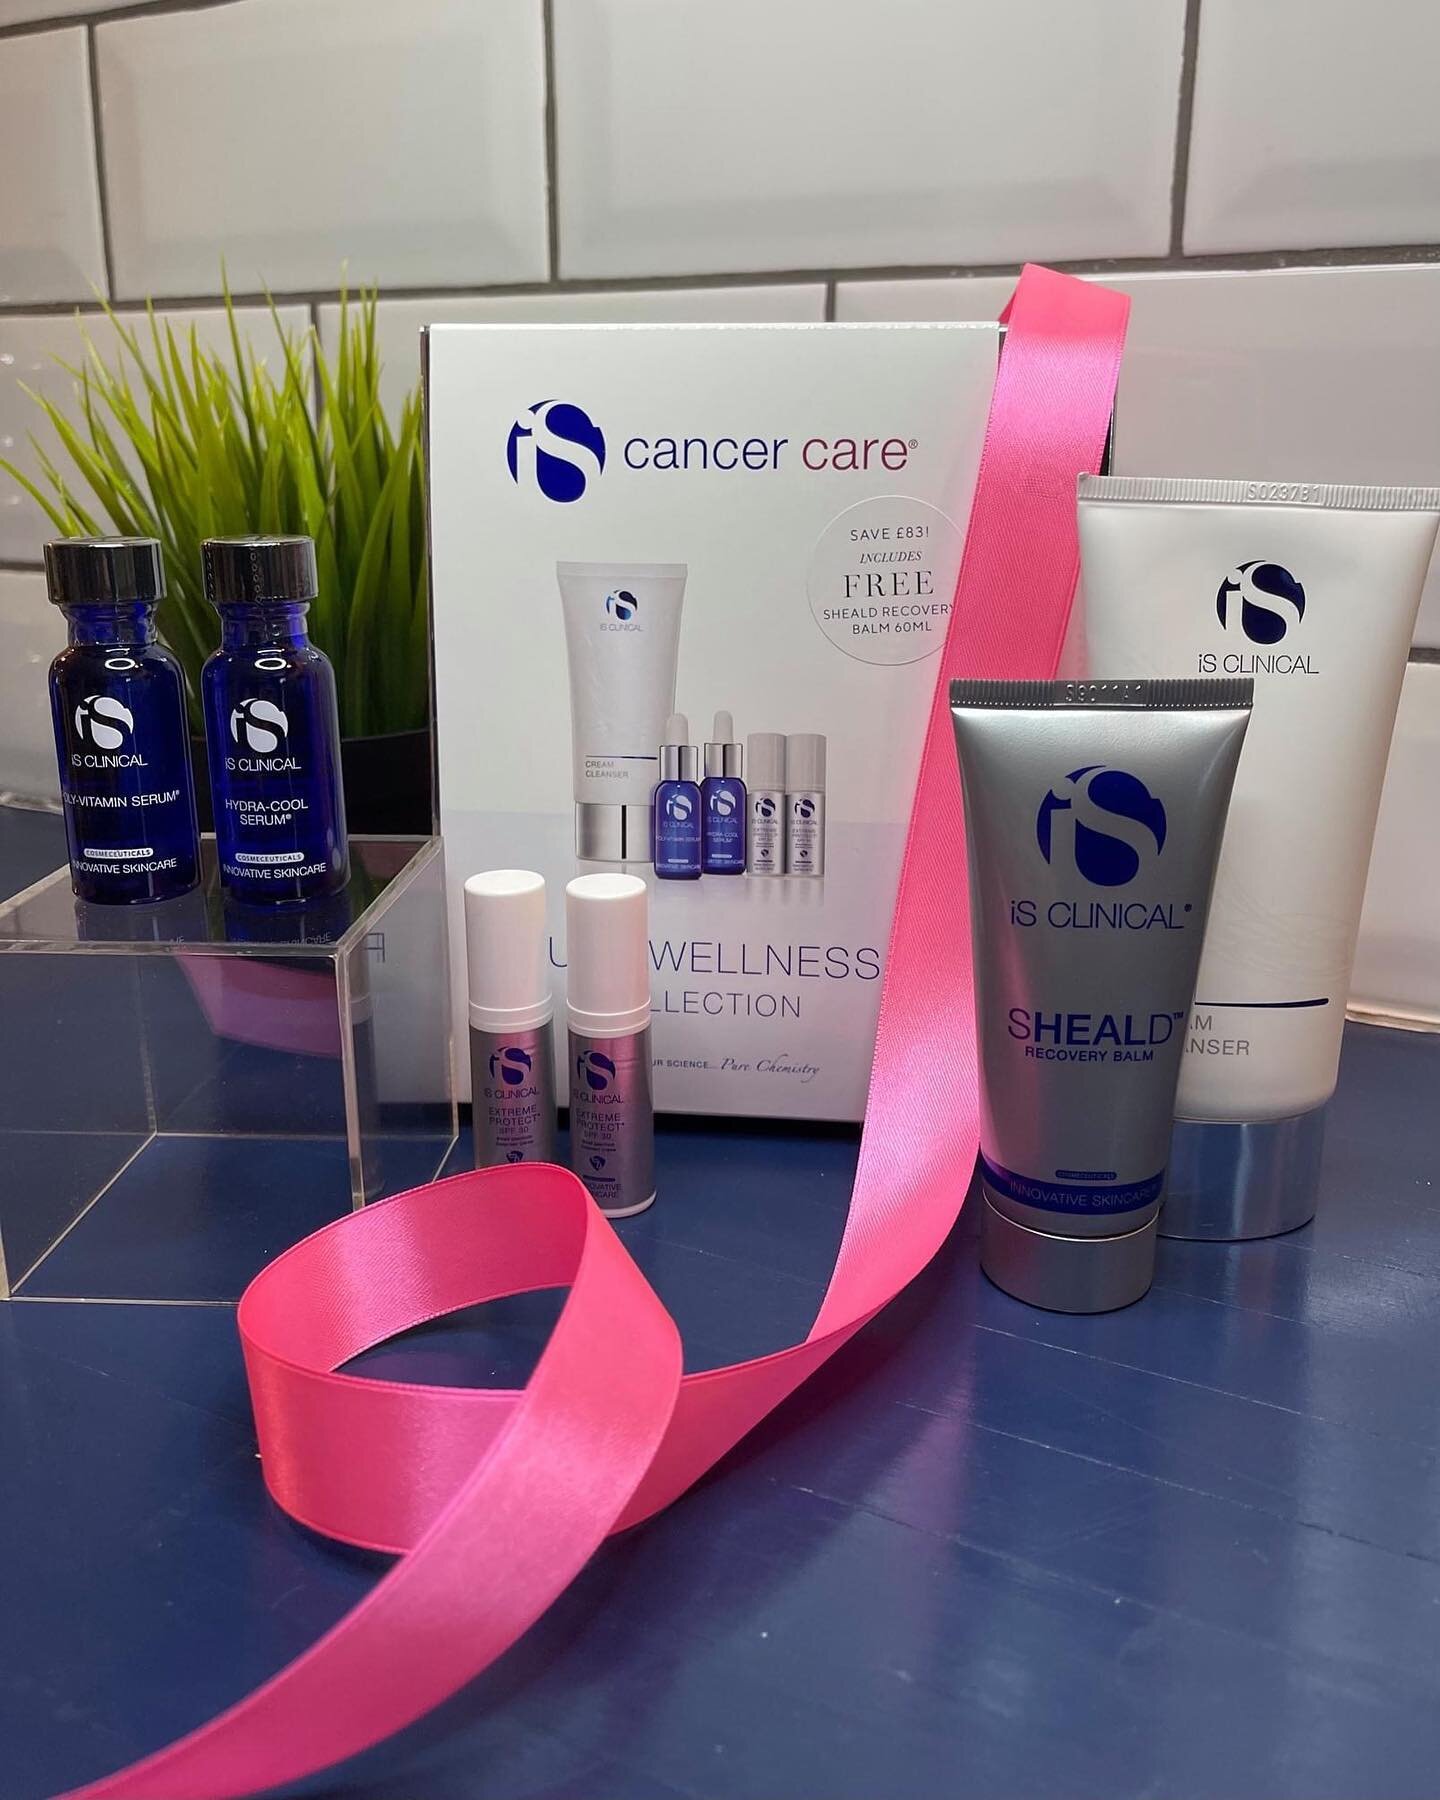 I am proud to announce I am now a registered iS Clinical Cancer skincare specialist. 🙌🙌

Please see the link my amazing daughter Hannah has just made me, giving you more information 💕
Link in bio 👆
https://spark.adobe.com/page/KQDe9GISHeGtd/